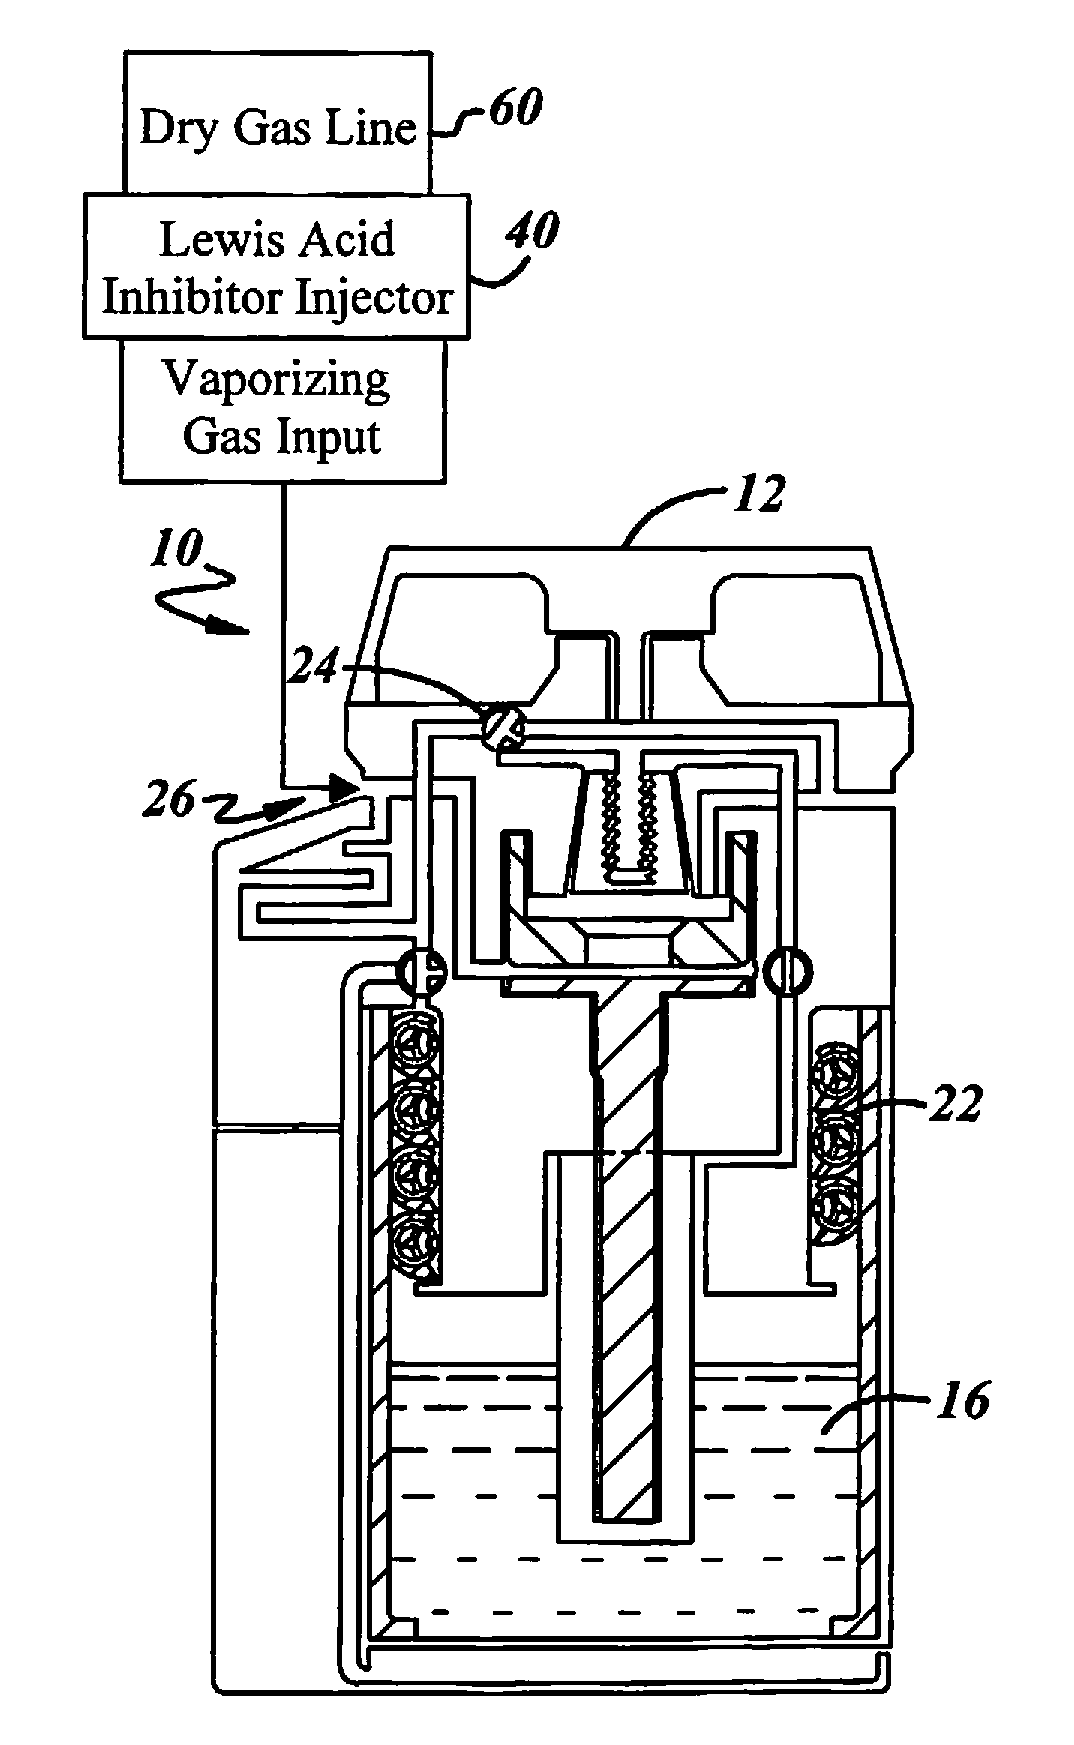 Apparatus for and related method of inhibiting lewis acid degradation in a vaporizer